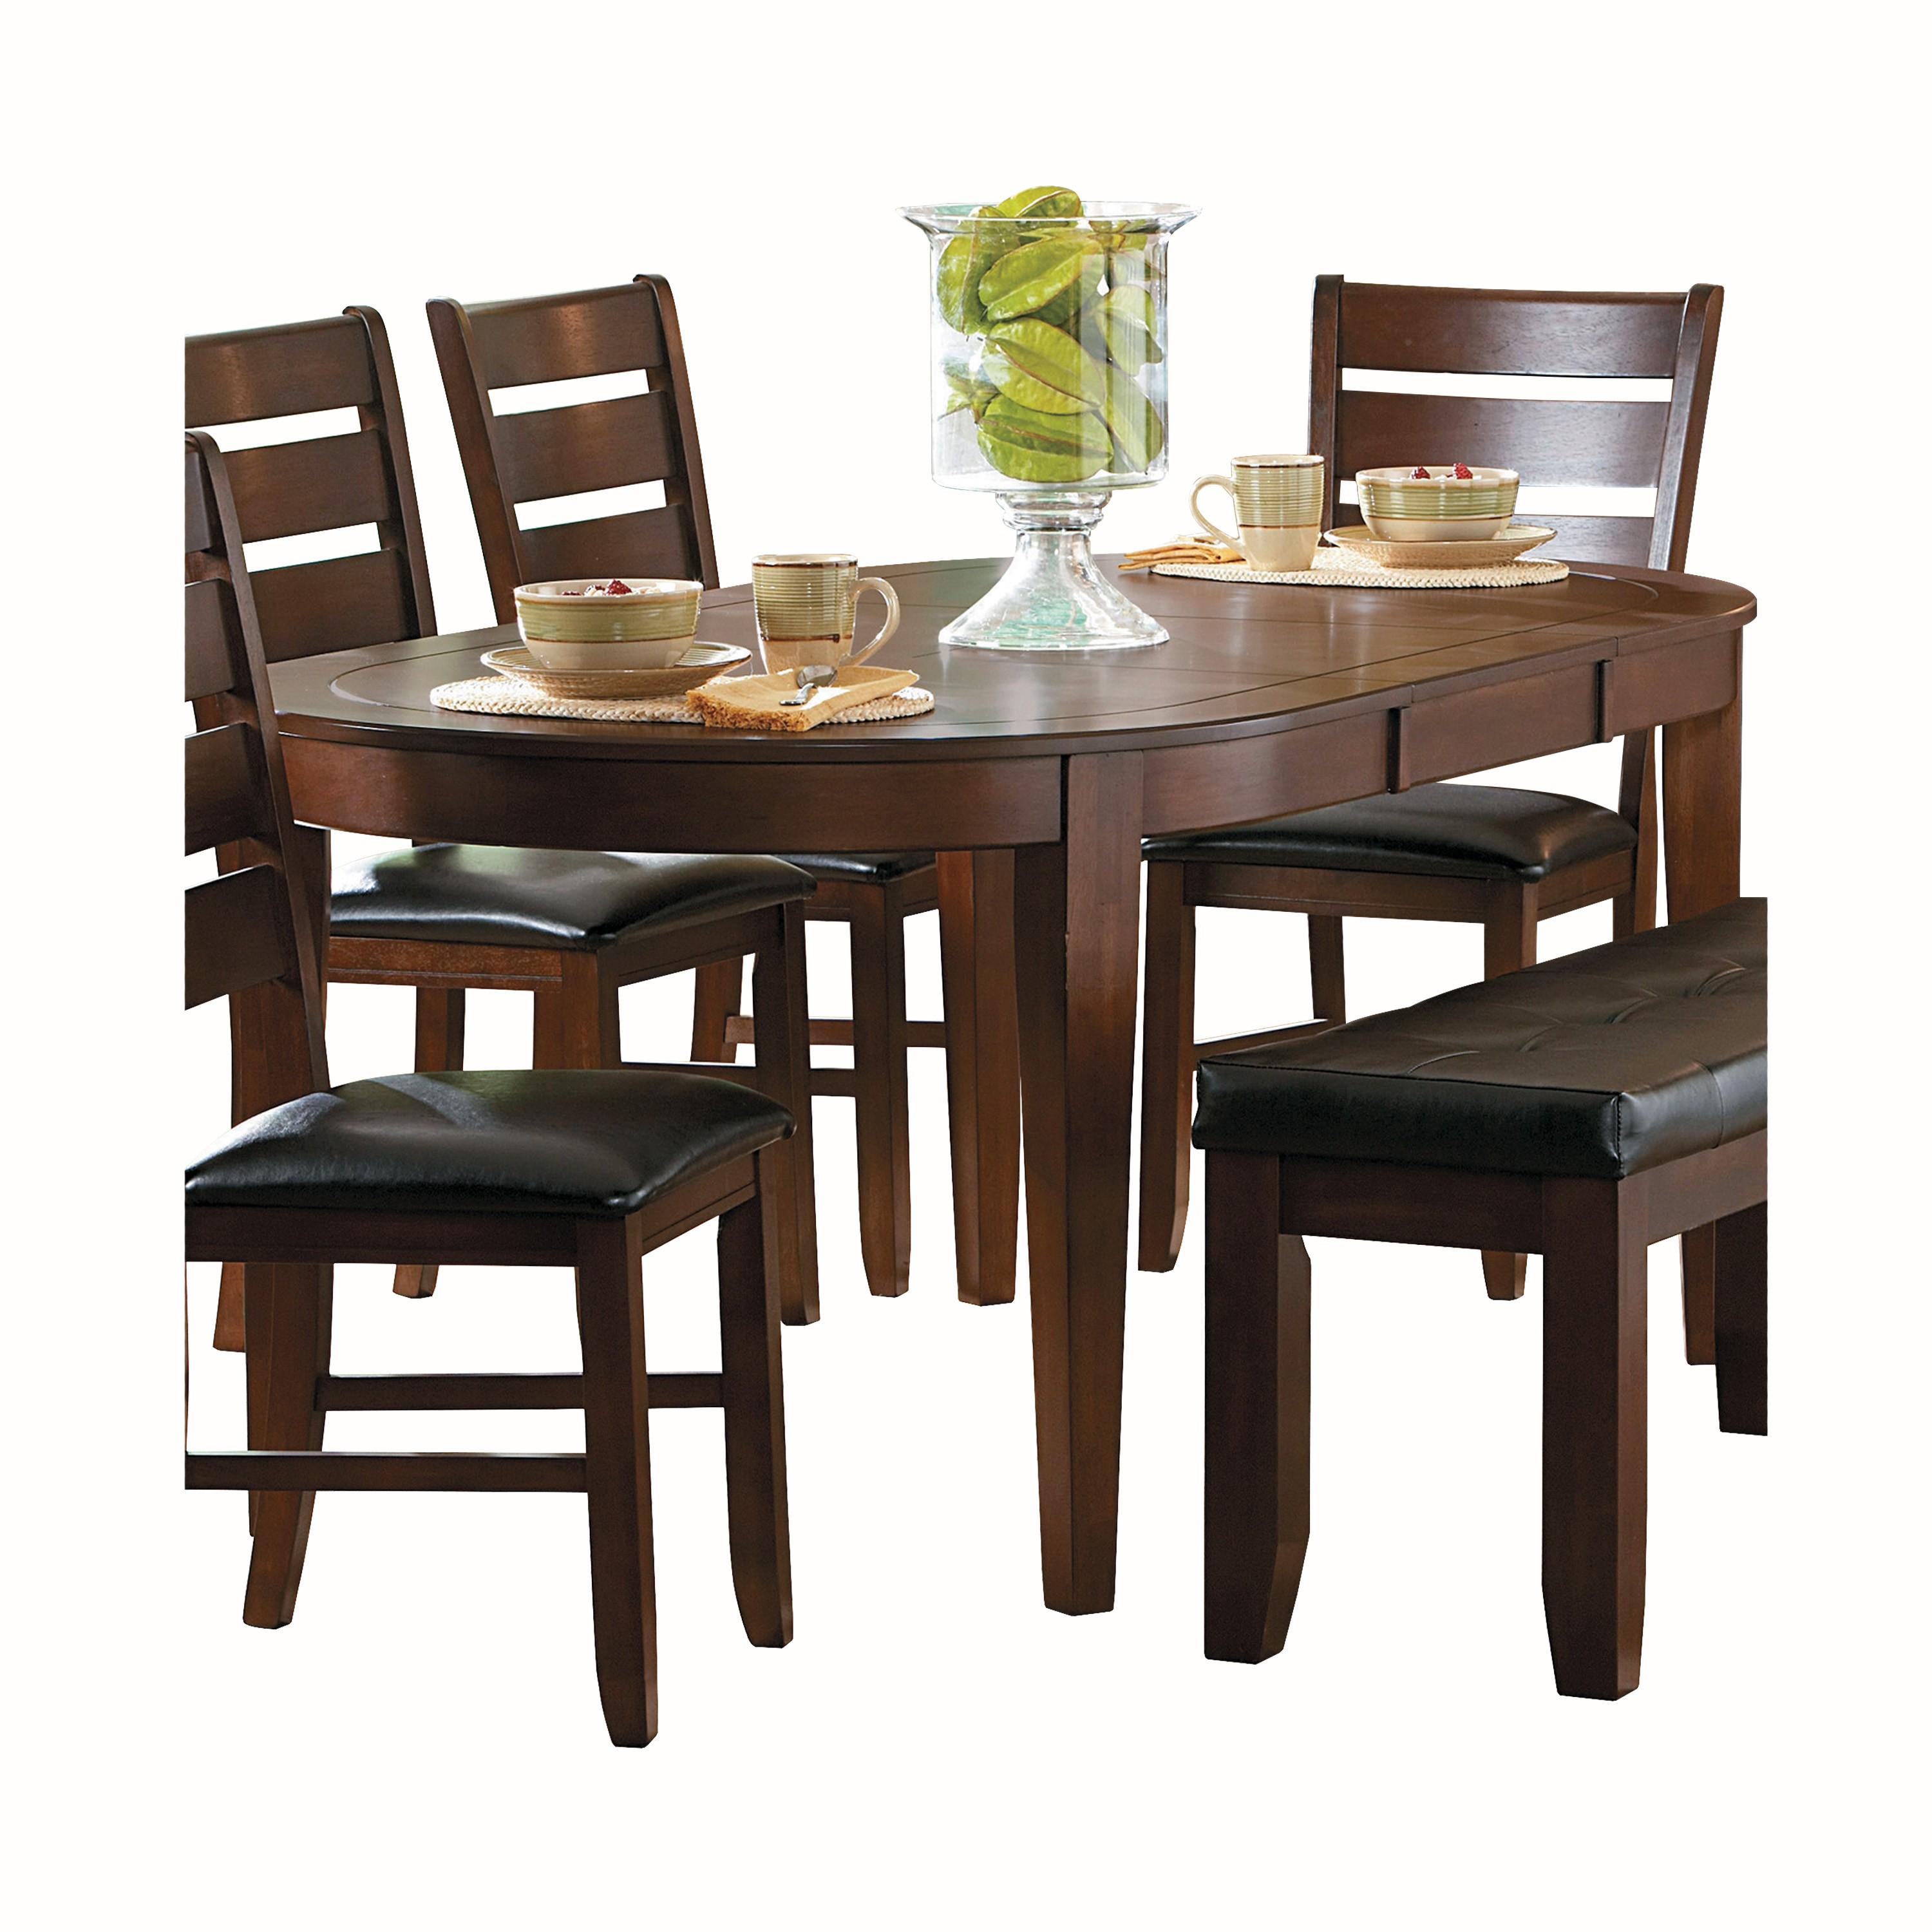 Contemporary Dining Room Set 586-76*5PC Ameillia 586-76*5PC in Dark Oak Faux Leather